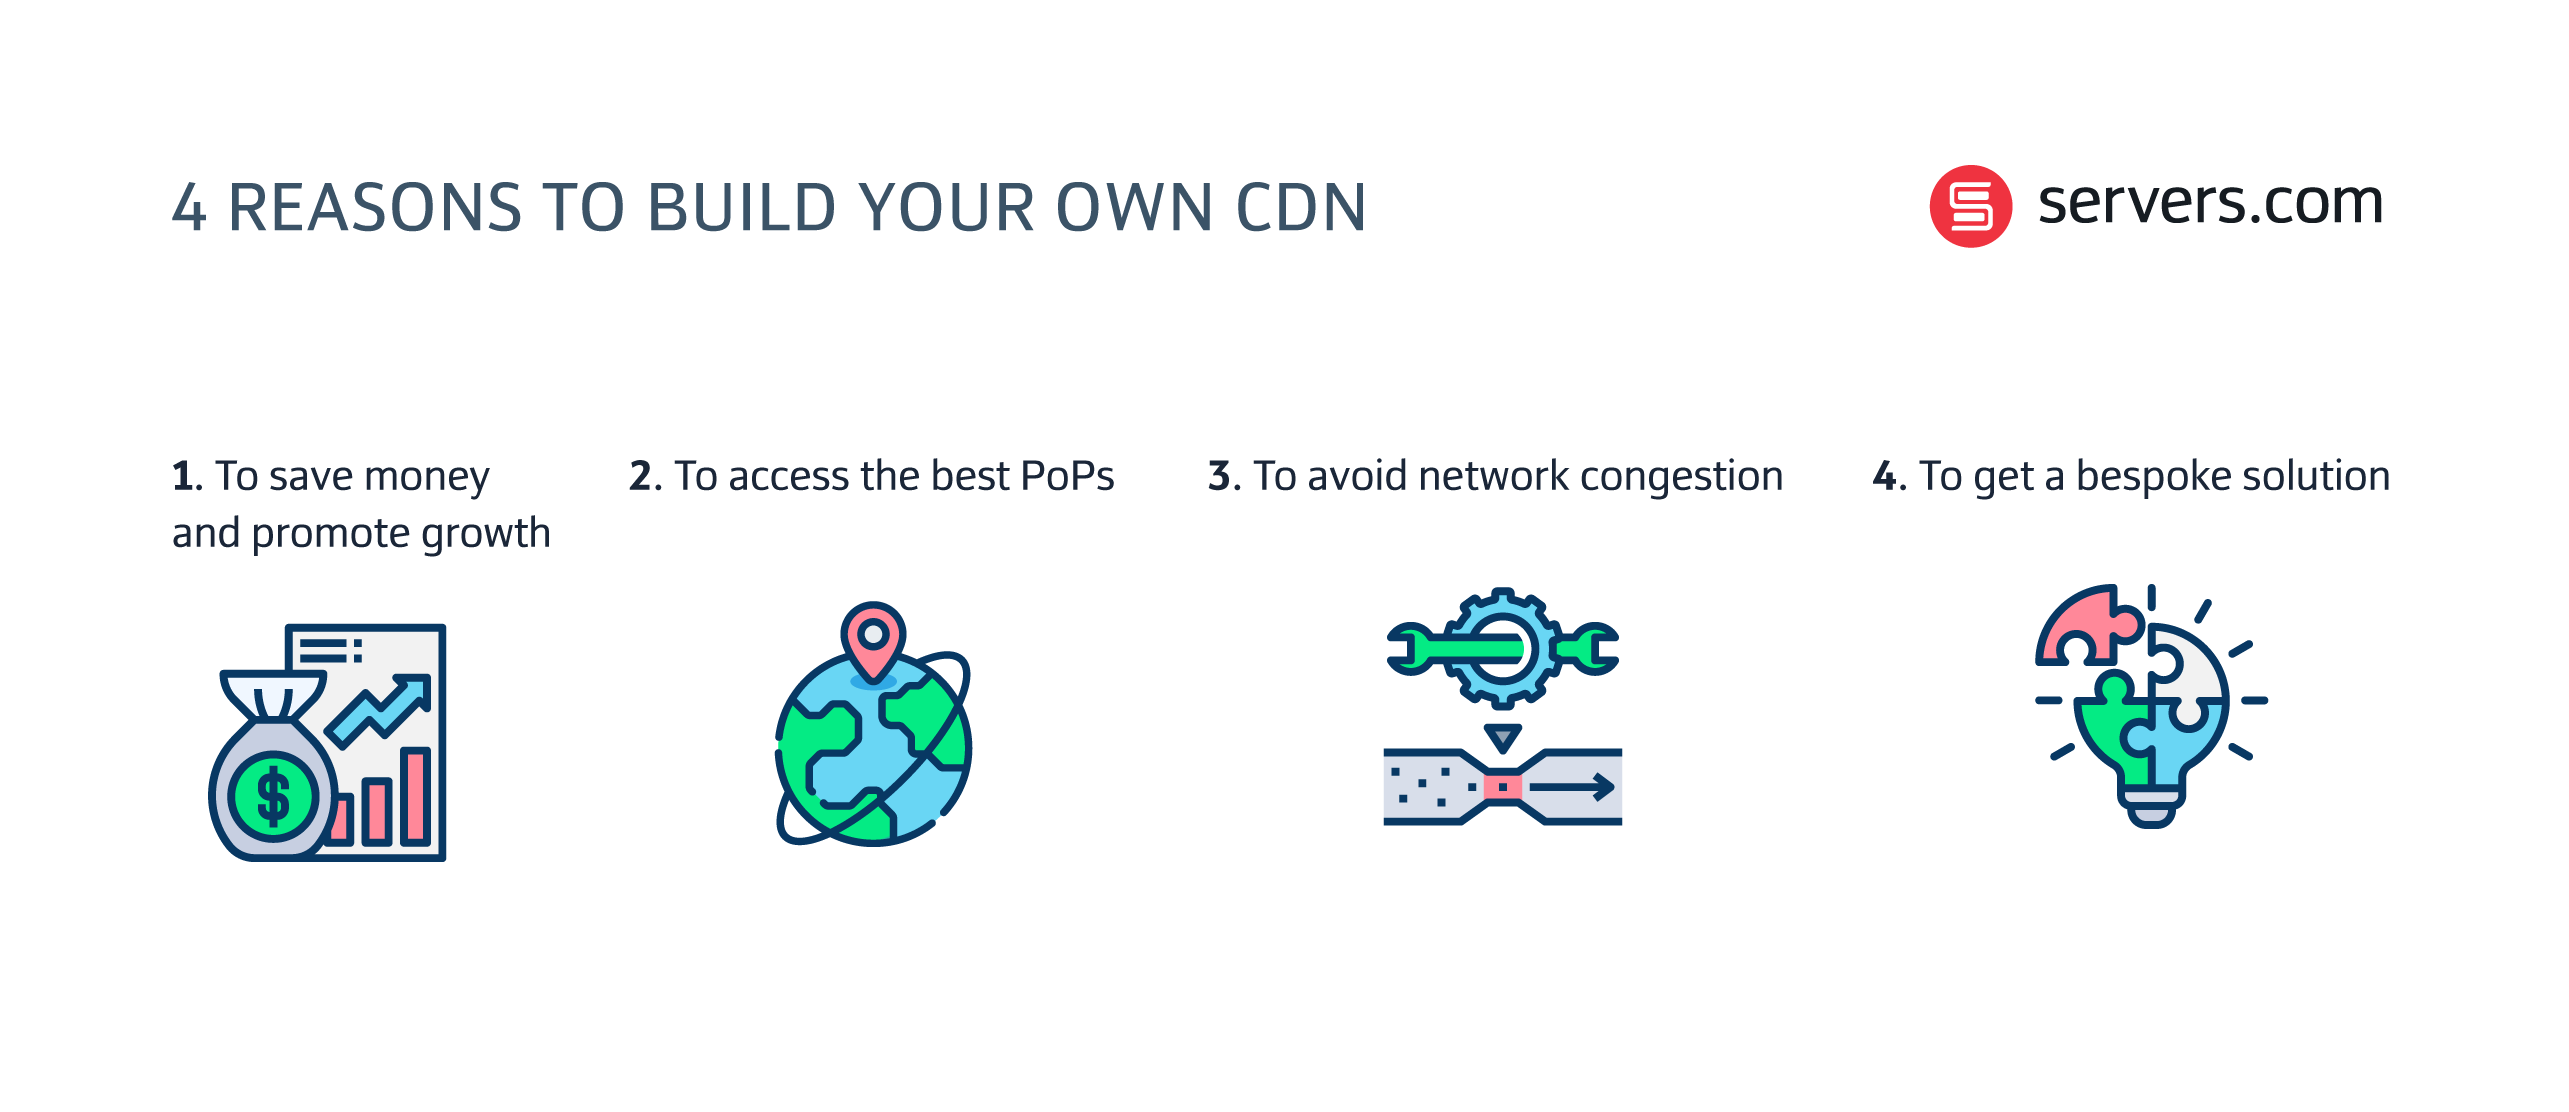 4 reasons to build your own CDN